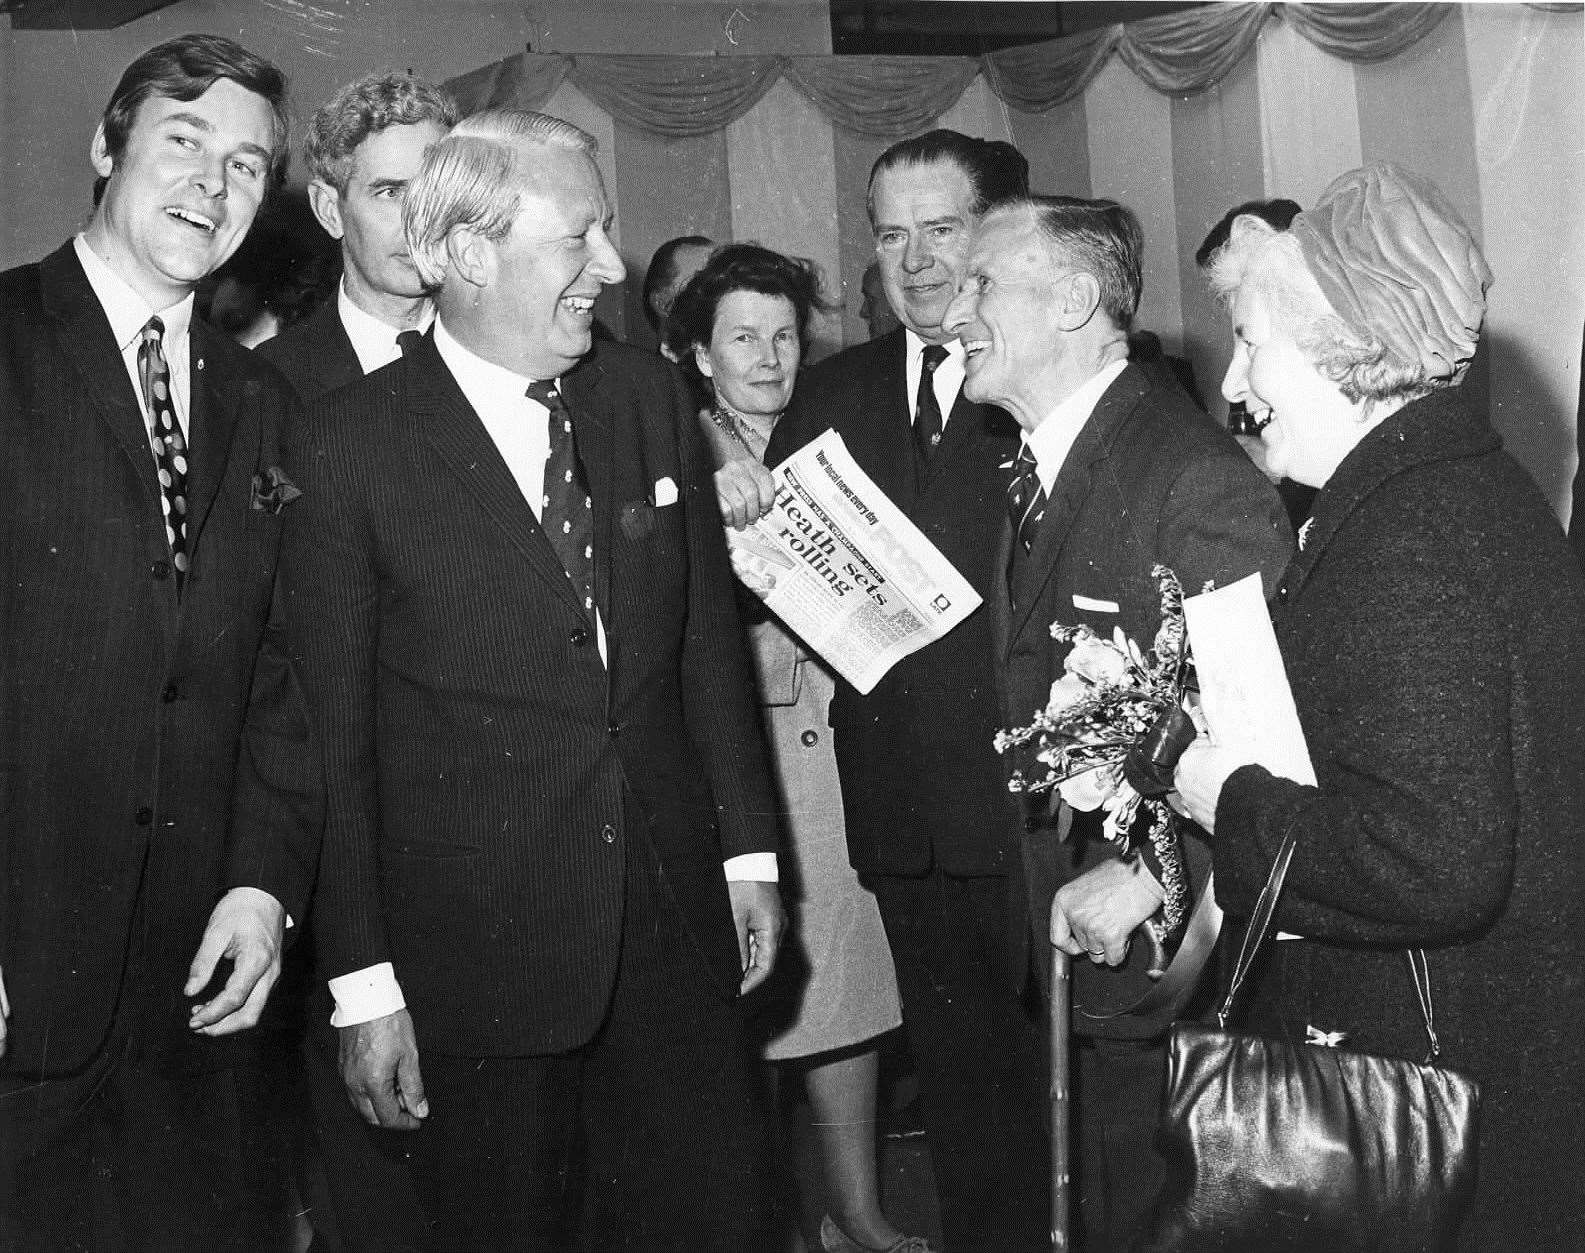 On January 23, 1970, Tory leader Edward Heath visited the Kent Messenger Group's Larkfield headquarters to officially open its new 500,000 web offset press. He is seen here with Edwin Boorman, Mr H R Pratt Boorman and Mrs Boorman and other guests